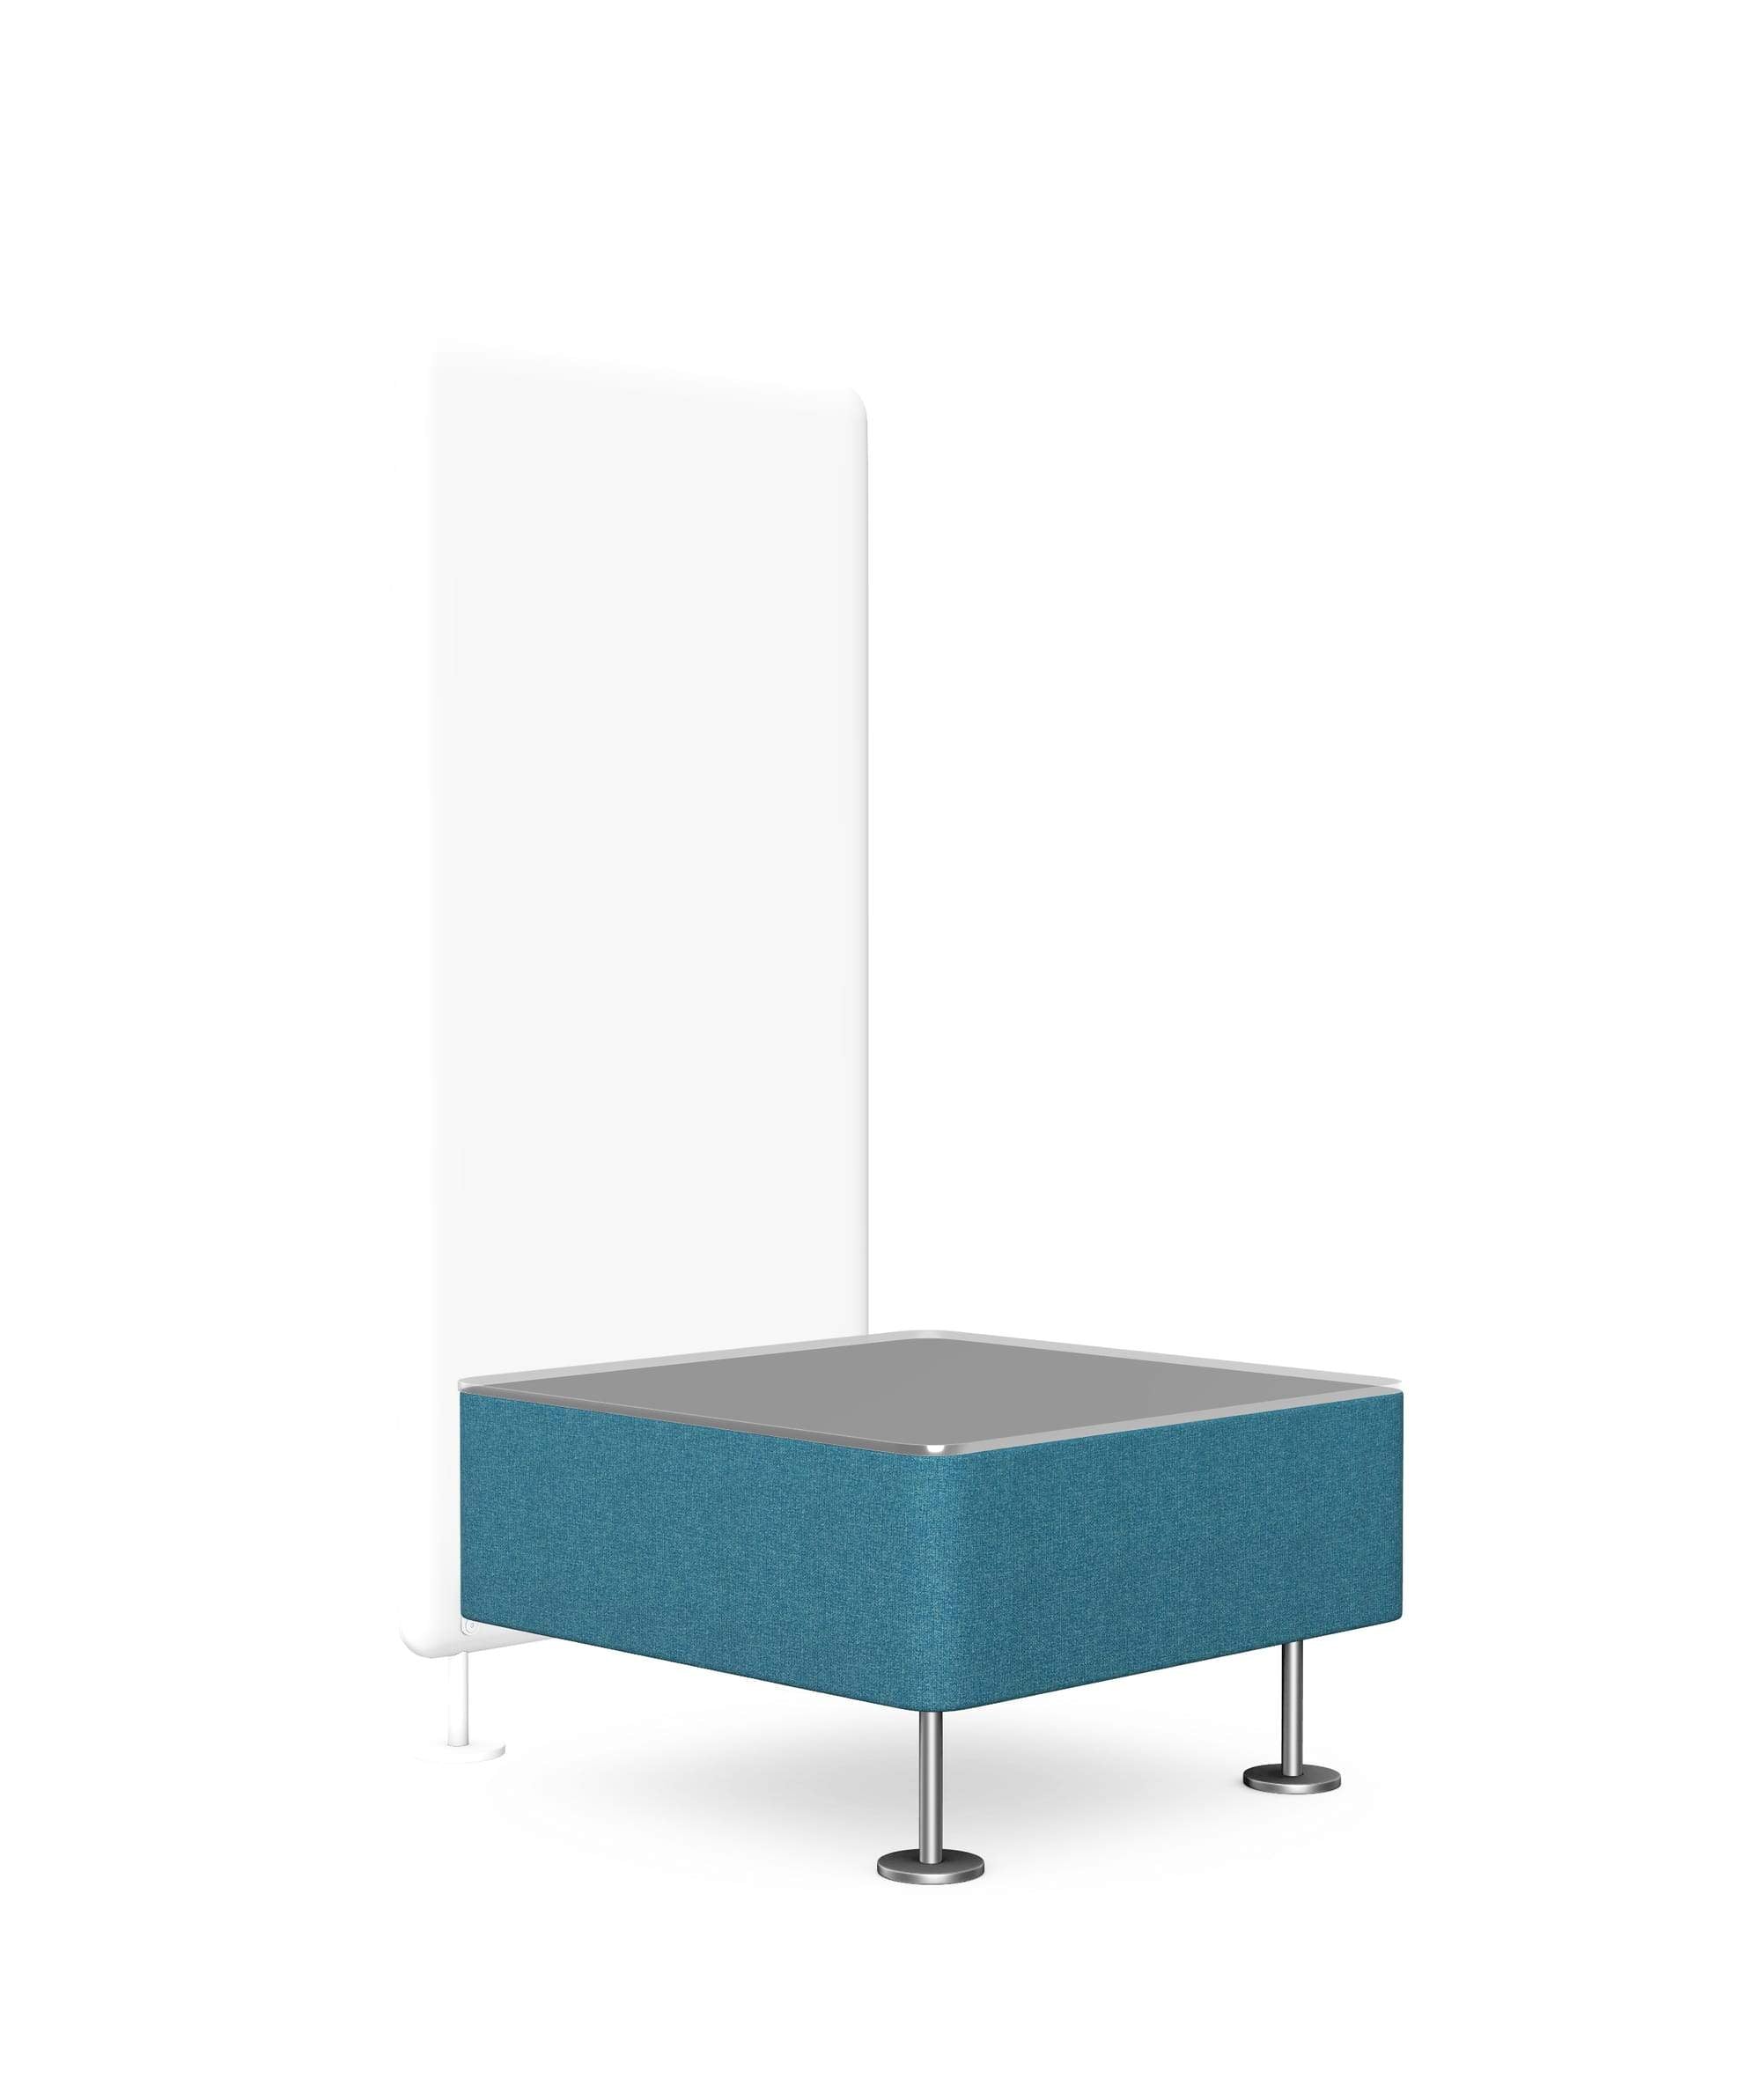 Wall In Square Table with 1 Partition Wall - Model BW1